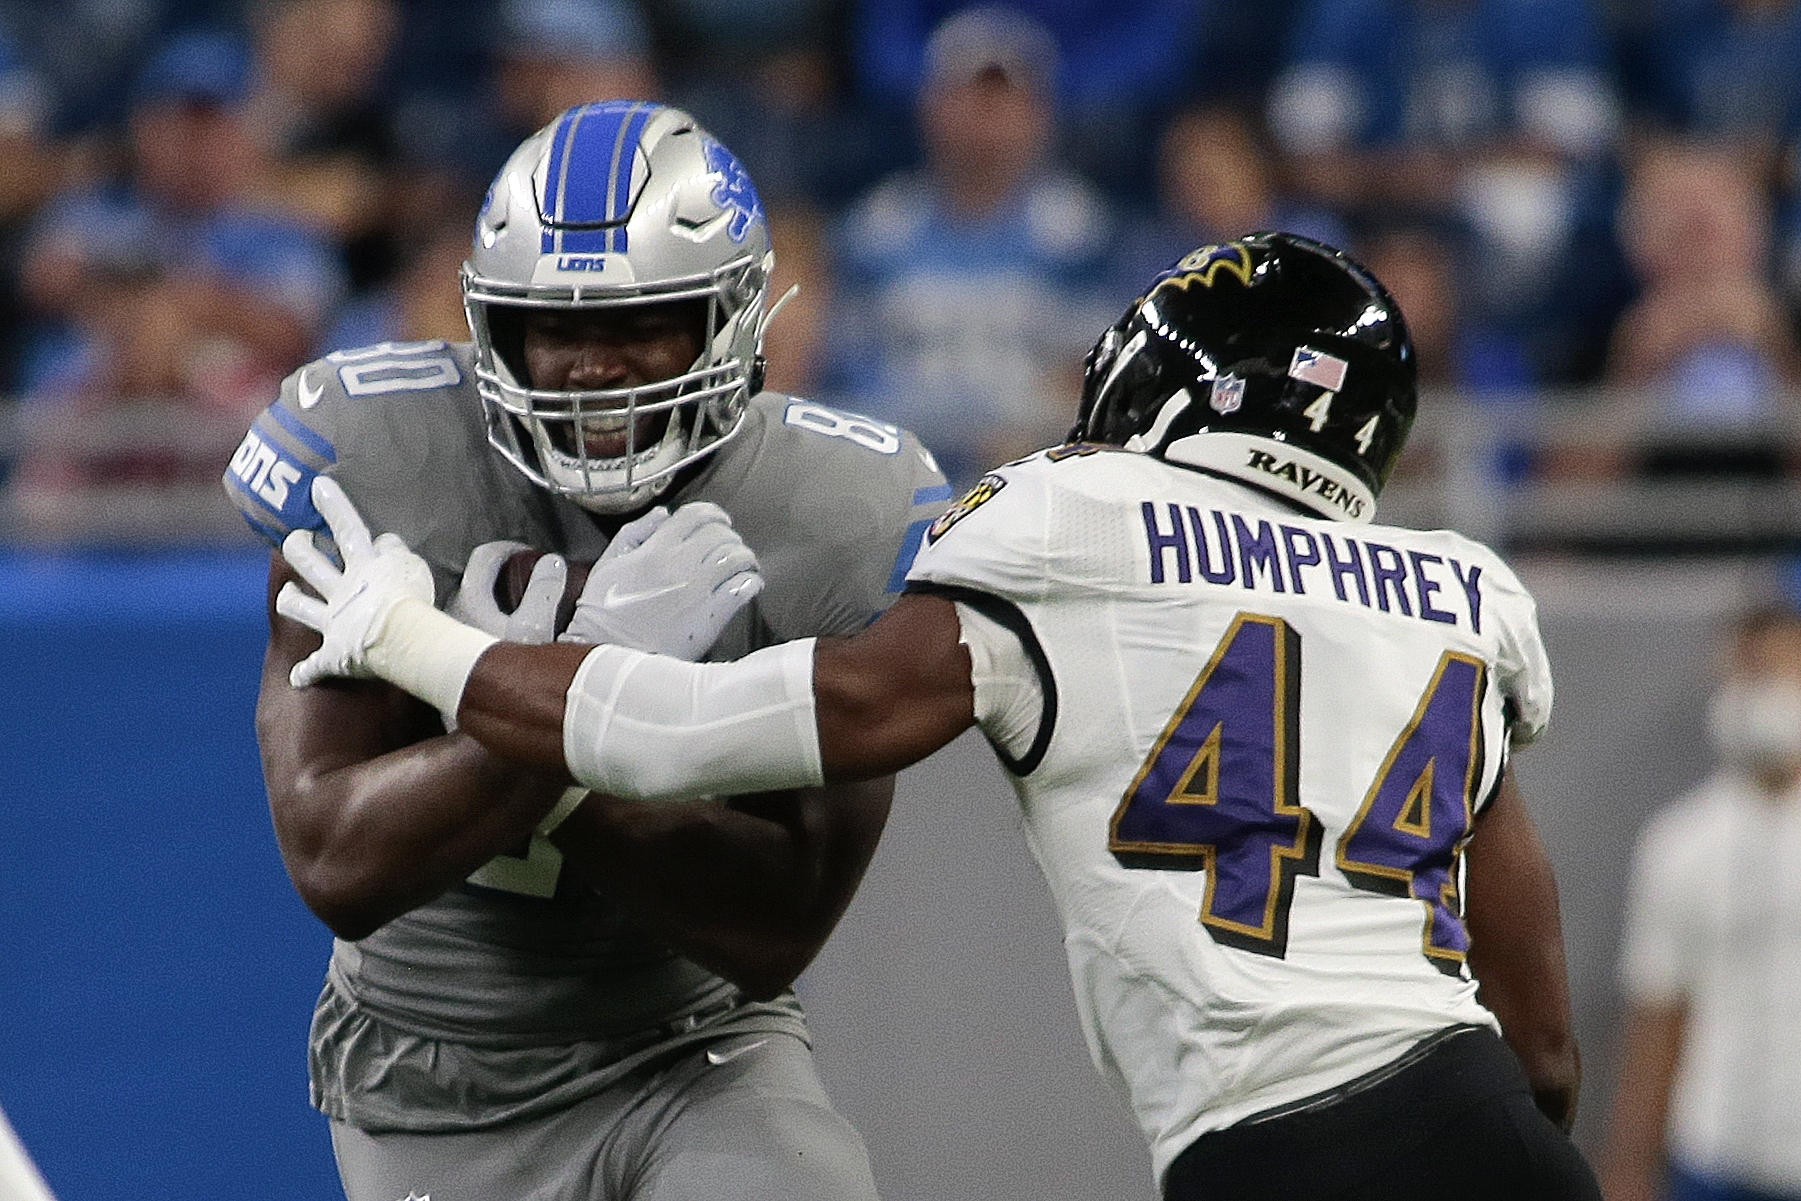 Detroit Lions tight end Darren Fells (80) tries to avoid Baltimore Ravens cornerback Marlon Humphrey (44) in the first half of an NFL football game in Detroit, Sunday, Sept. 26, 2021. (AP Photo/Tony Ding)